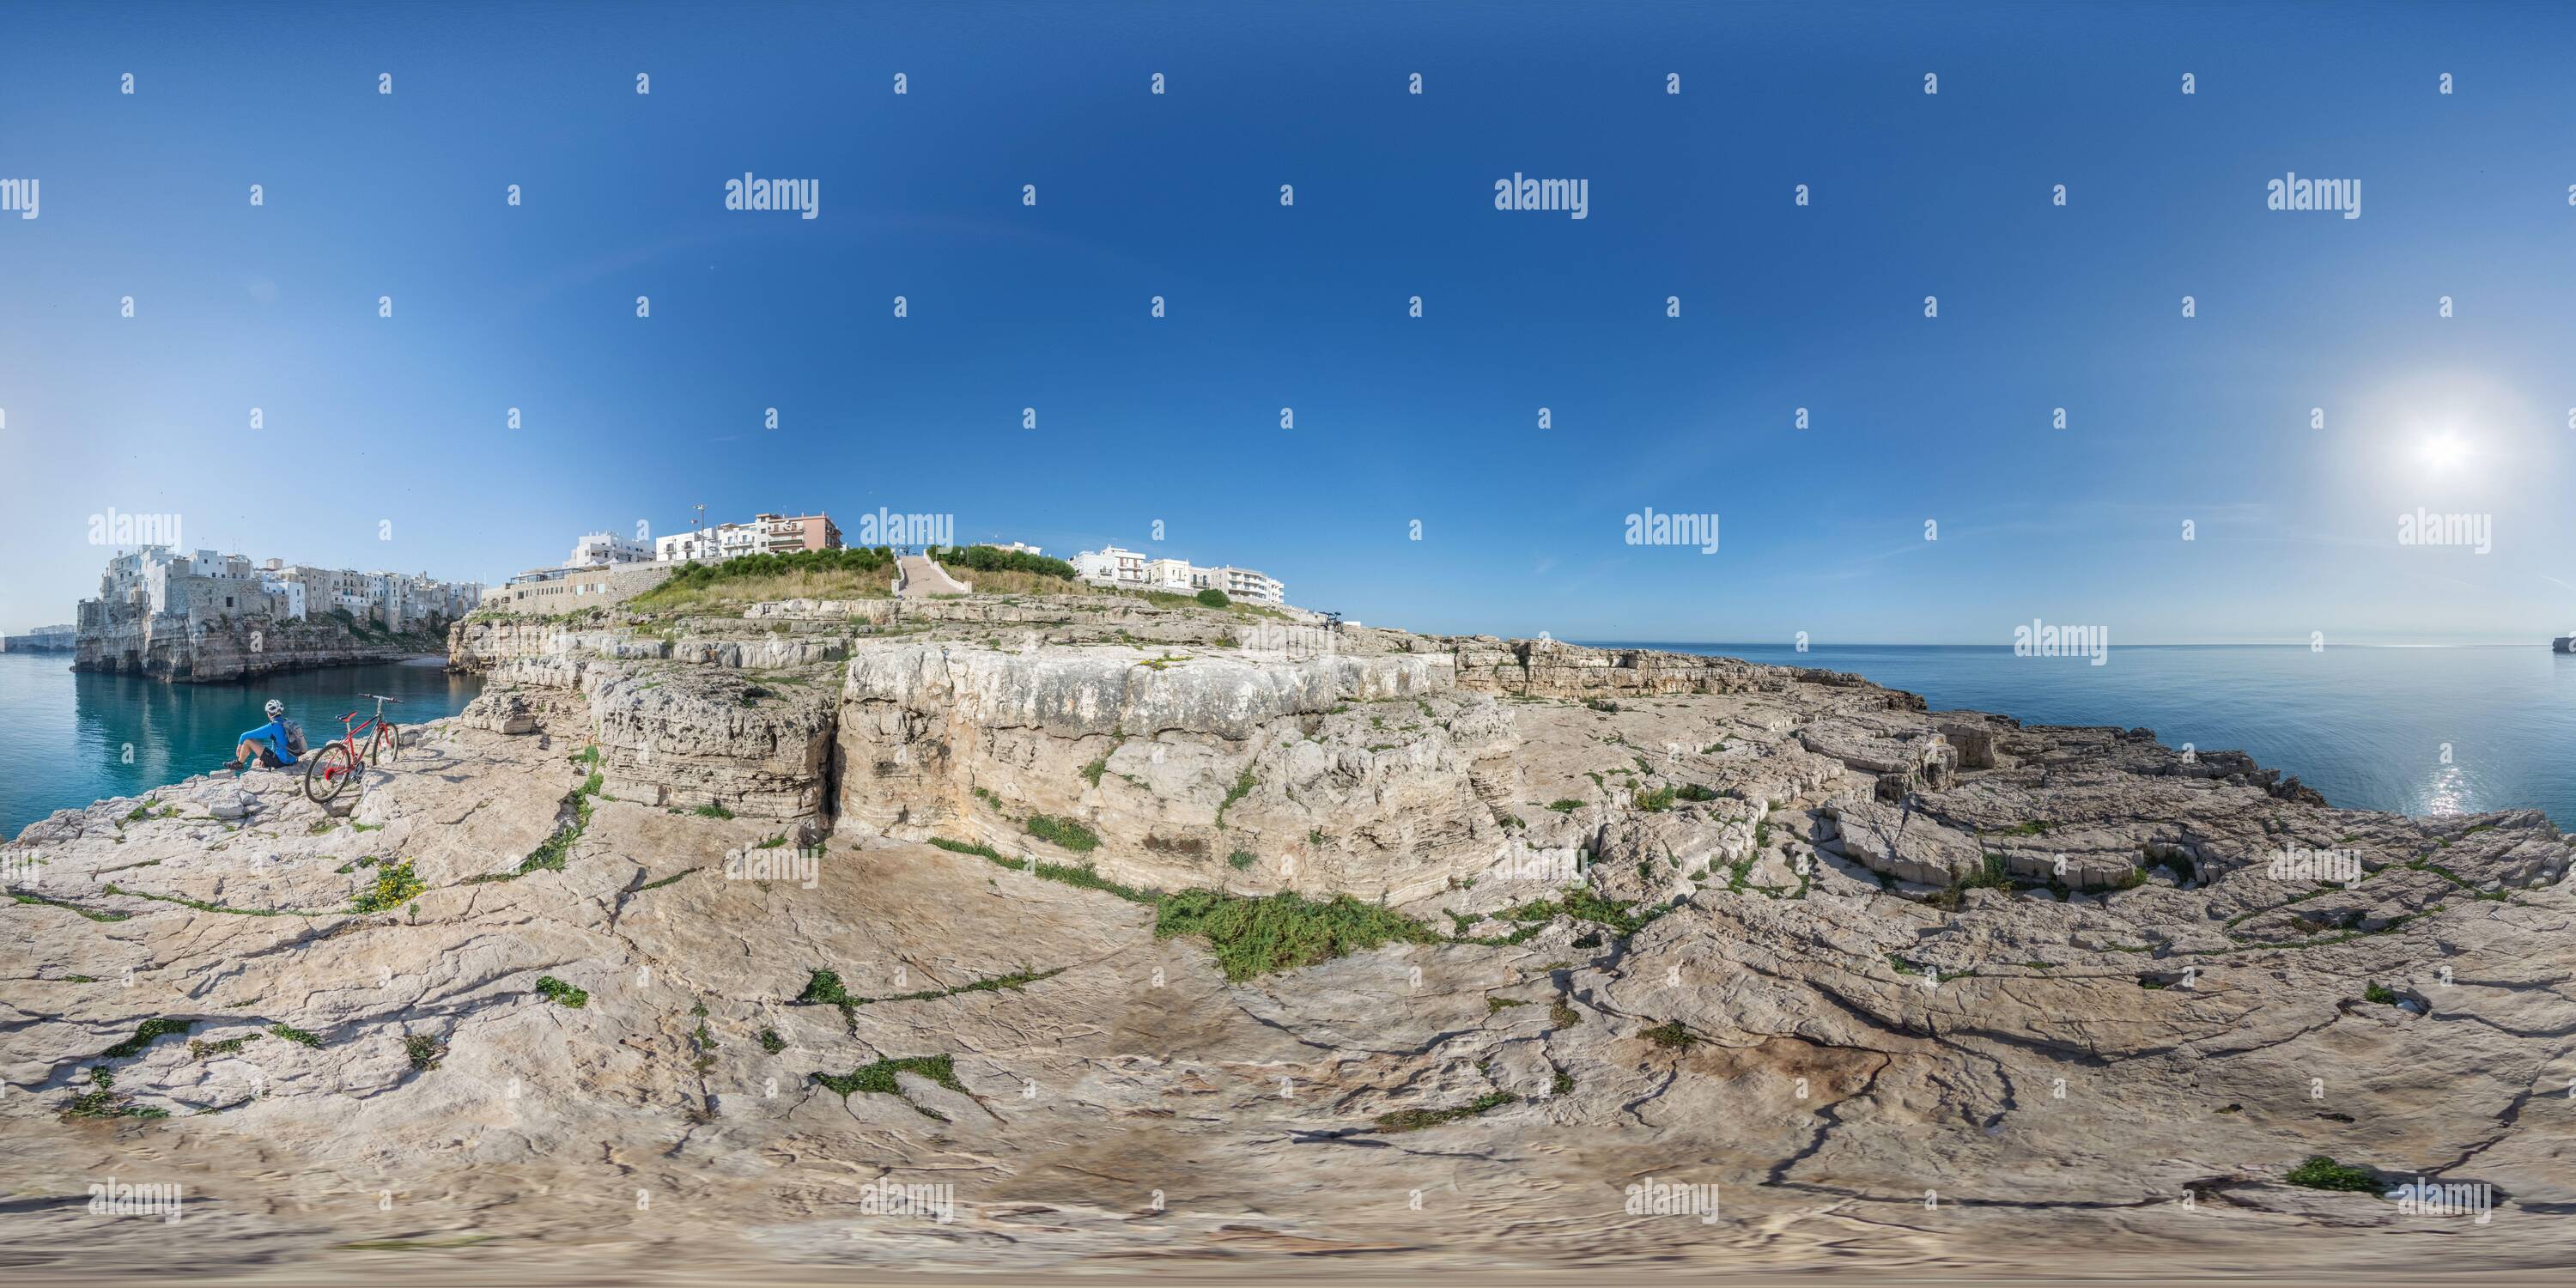 360 degree panoramic view of polignano a mare in mountain bike